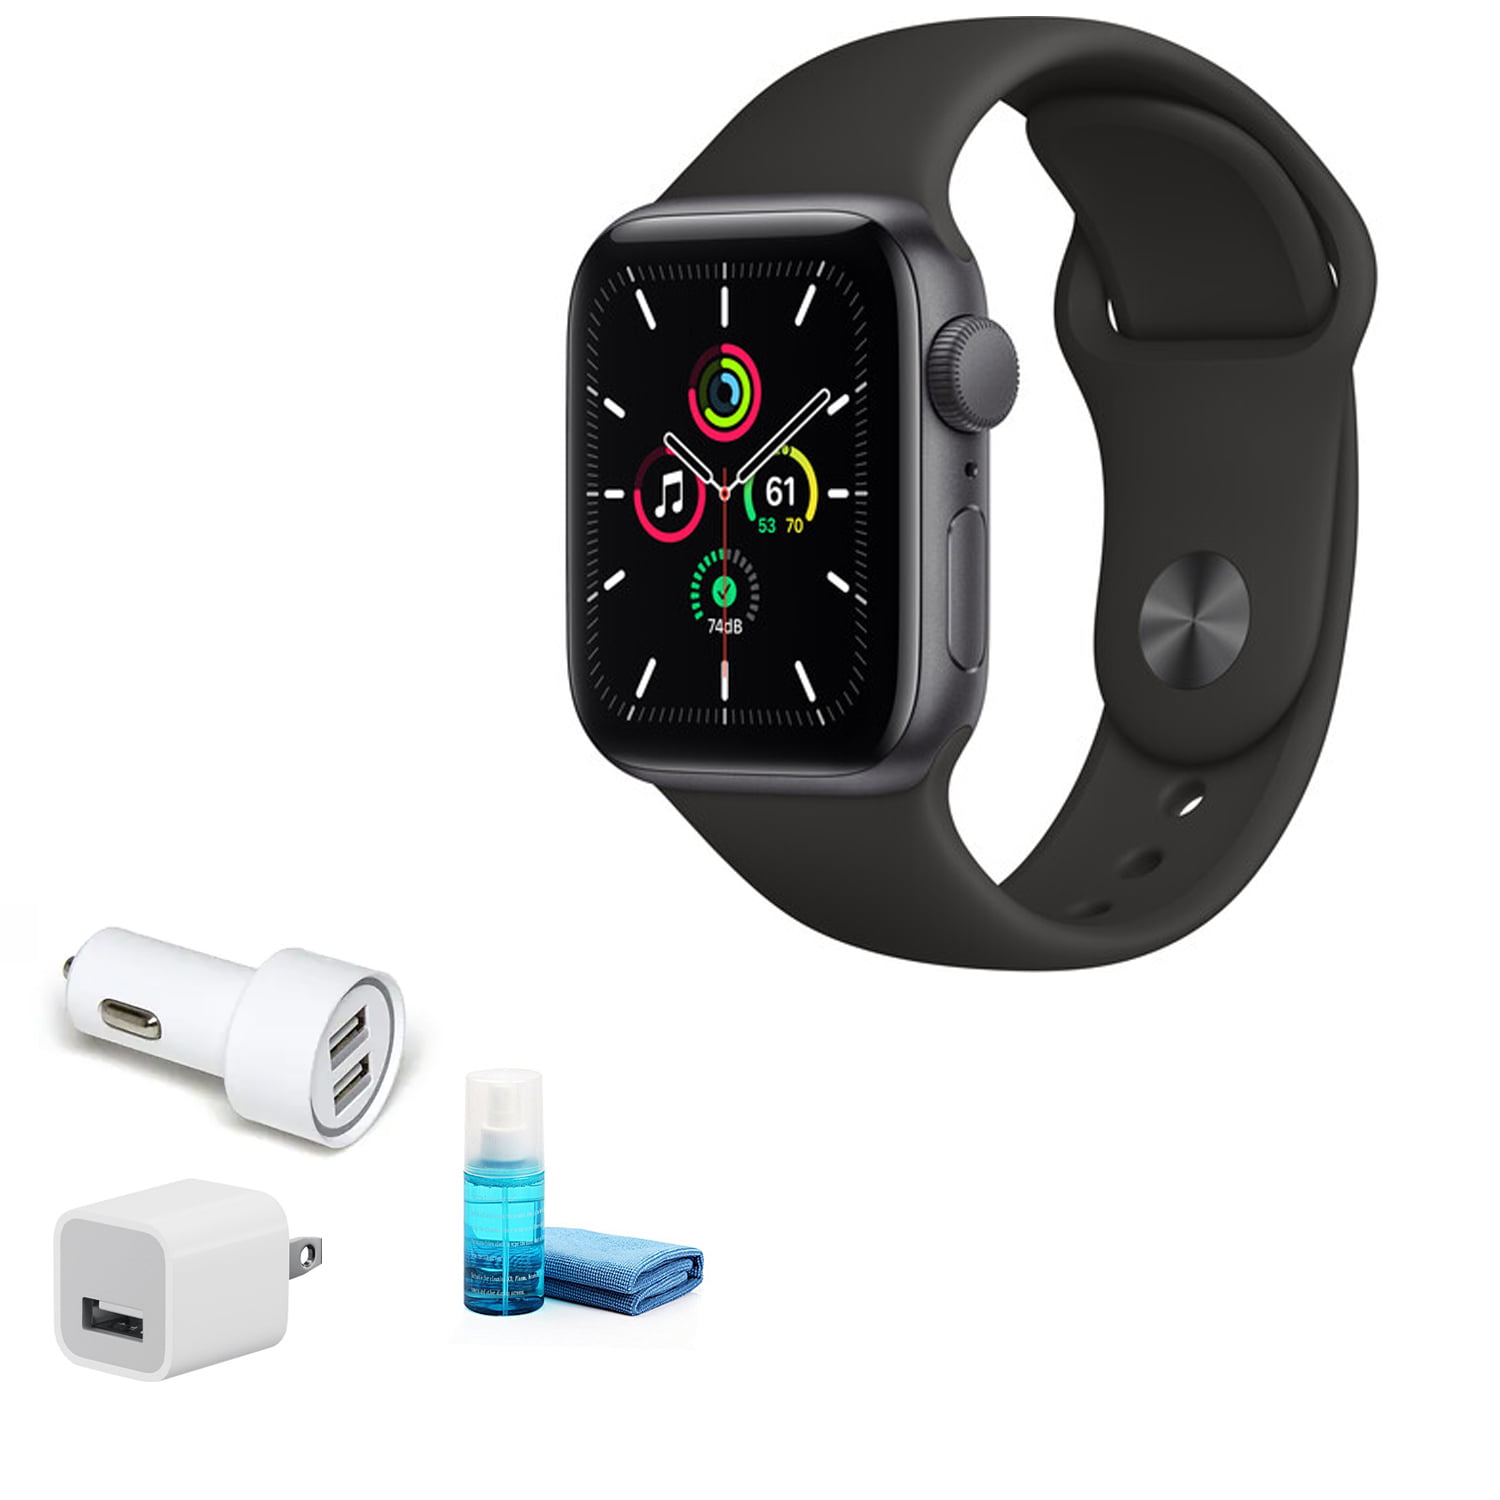 Apple Watch SE (GPS, 40mm) - Space Gray Aluminum Case with Black 